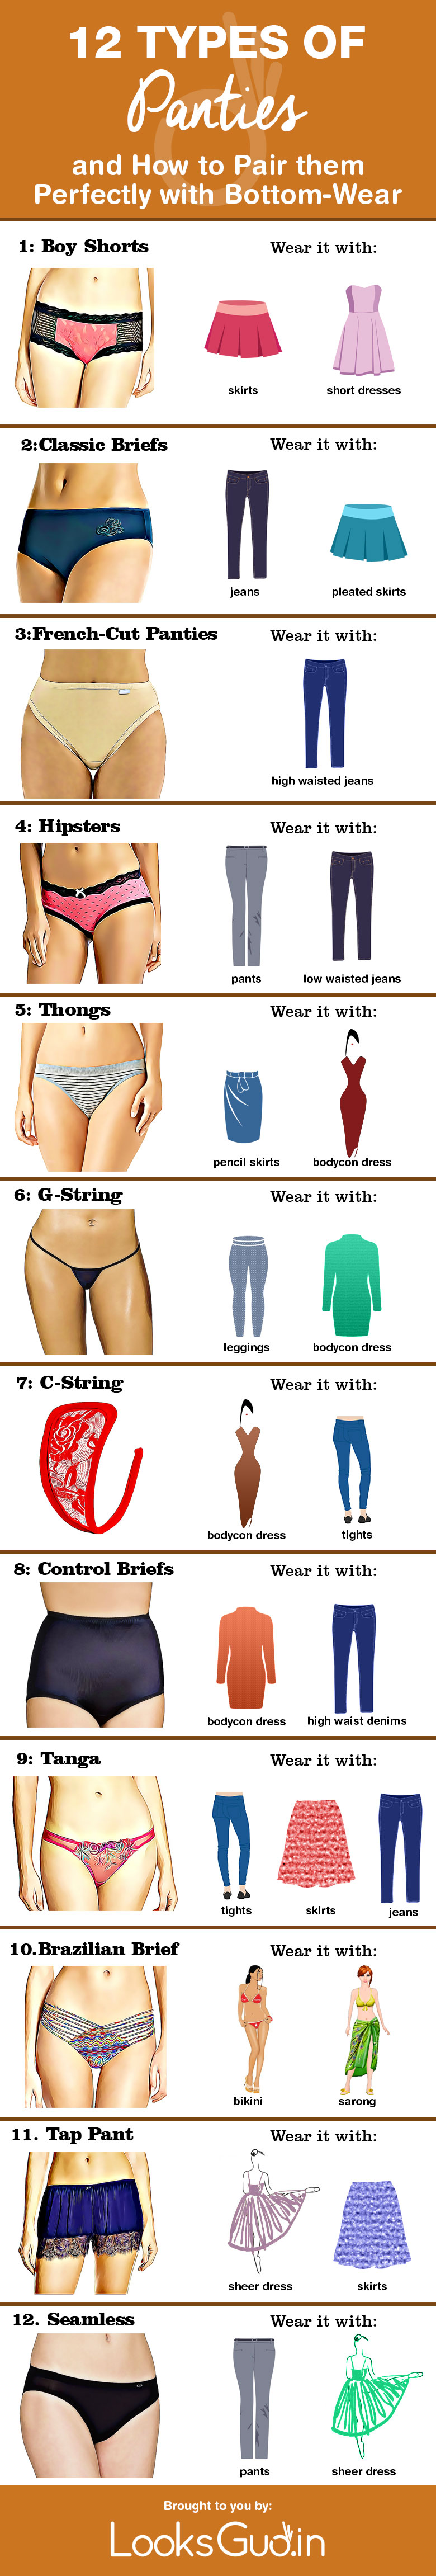 12 Types of Panties and How to Pair Them Perfectly with Bottom-Wear